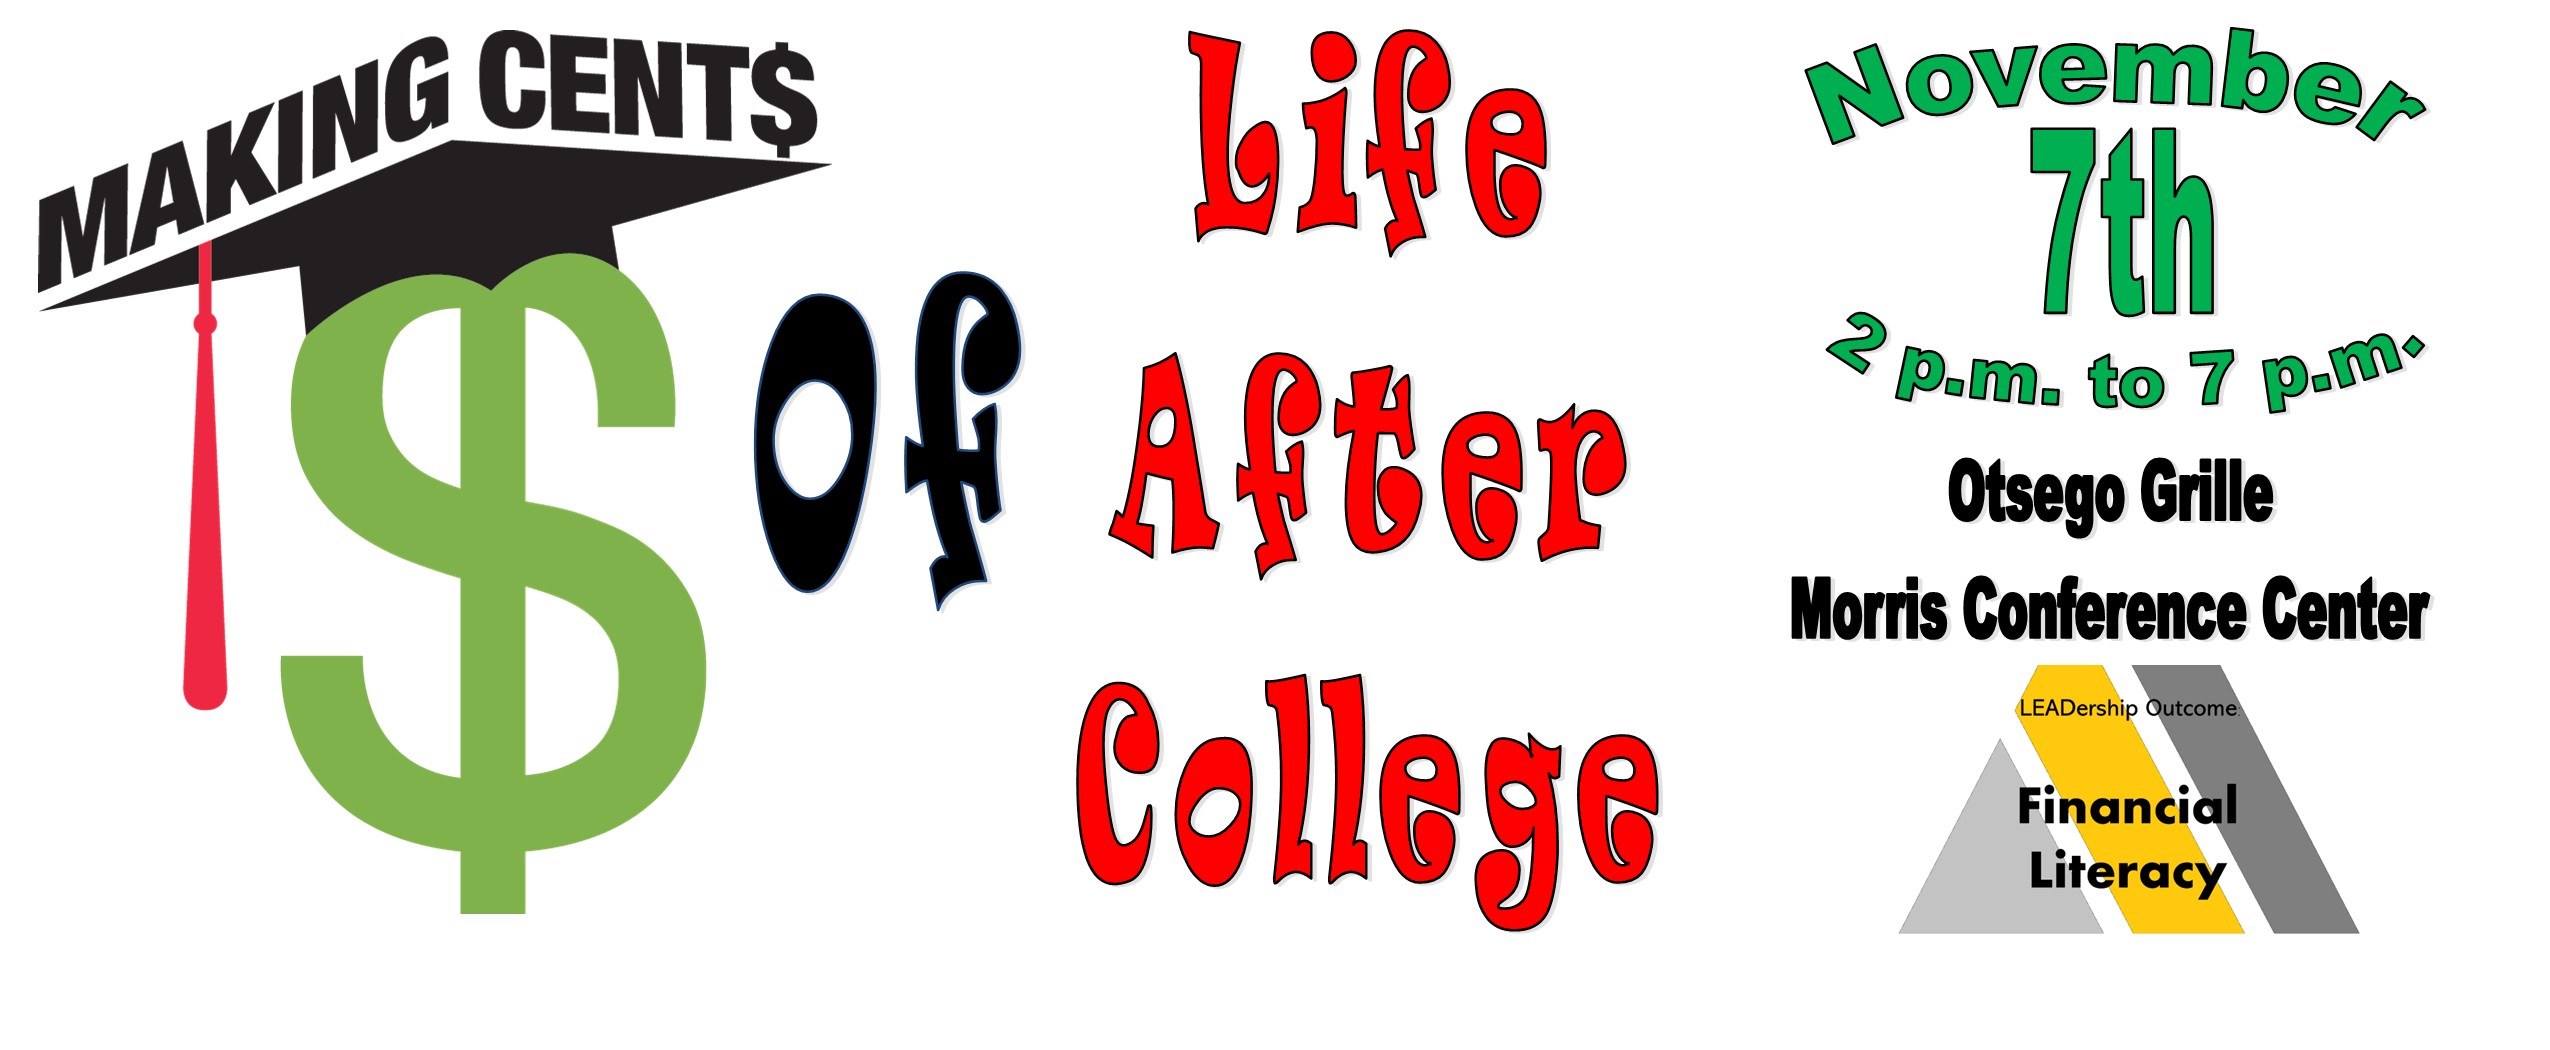 Making Cent$ of Life After College, November 7th, Otsego Grille Morris Conference Center